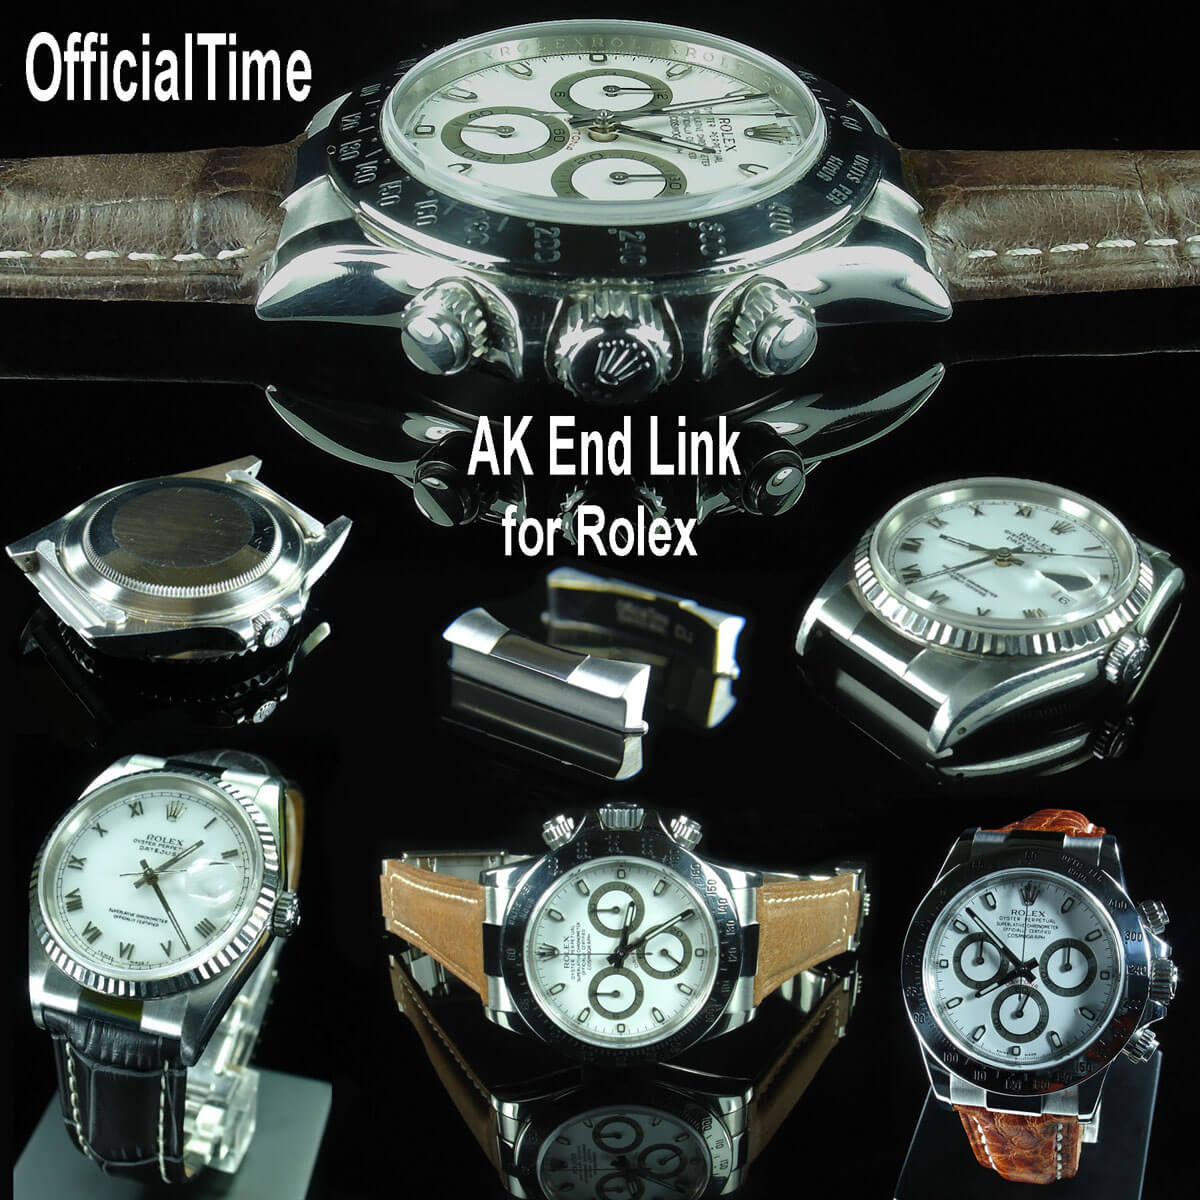 AK End Link for Rolex